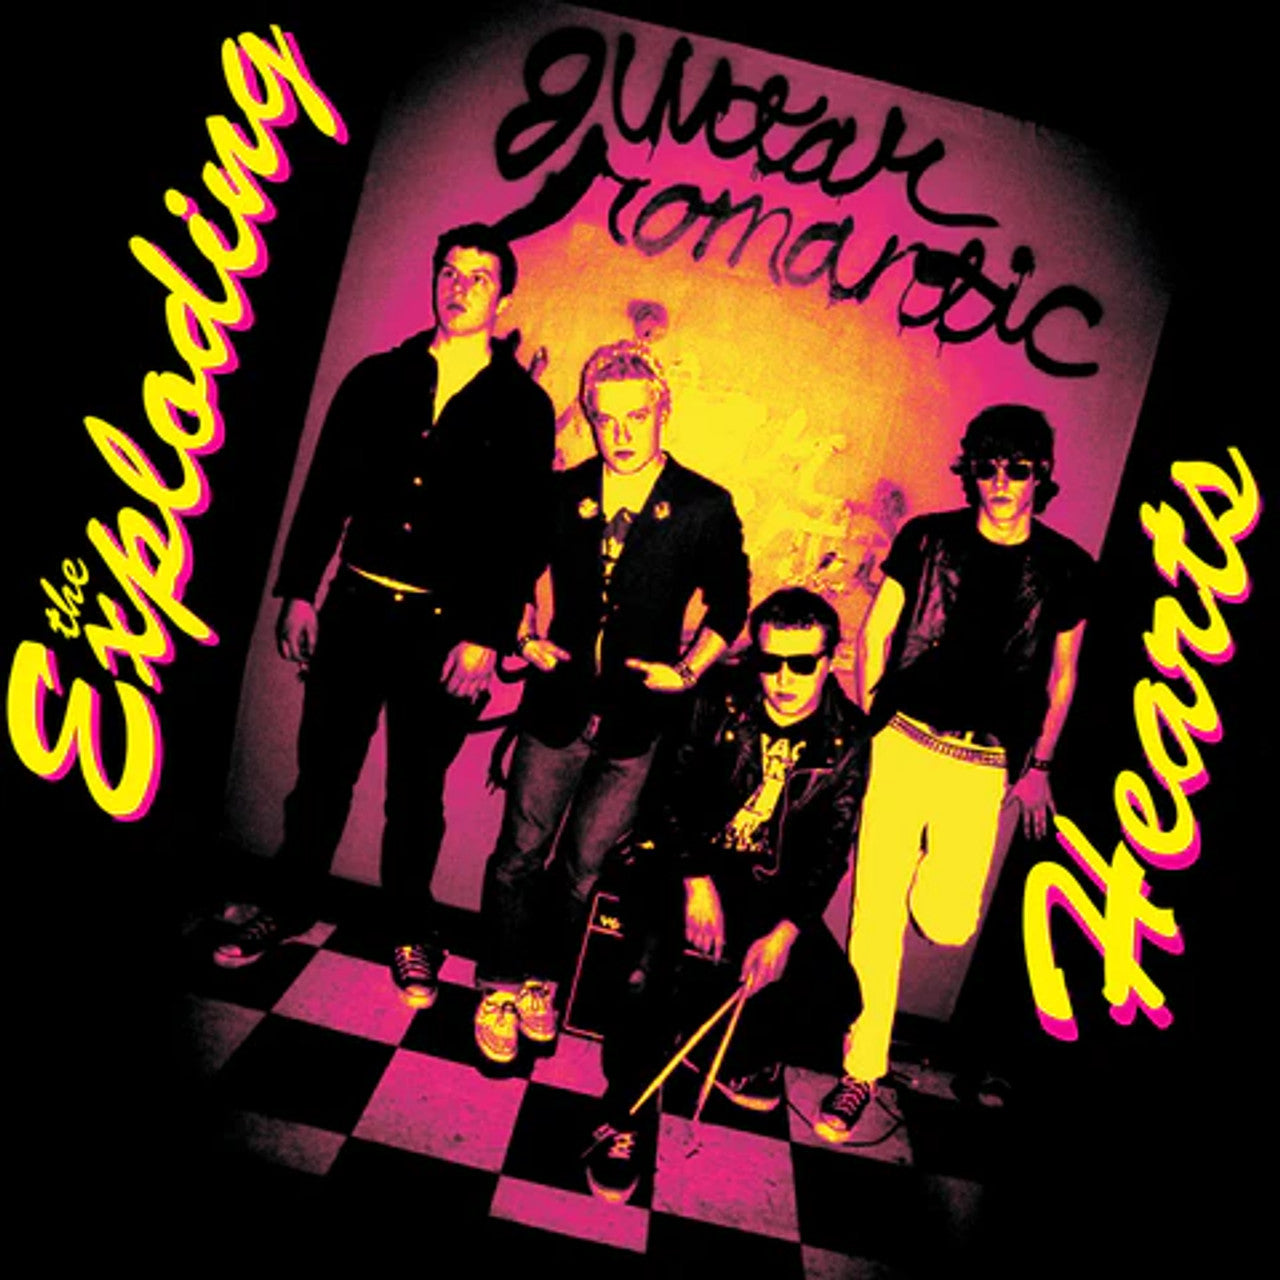 THE EXPLODING HEARTS - GUITAR ROMANTIC - EXPANDED AND REMASTERED VERSION - VINYL LP